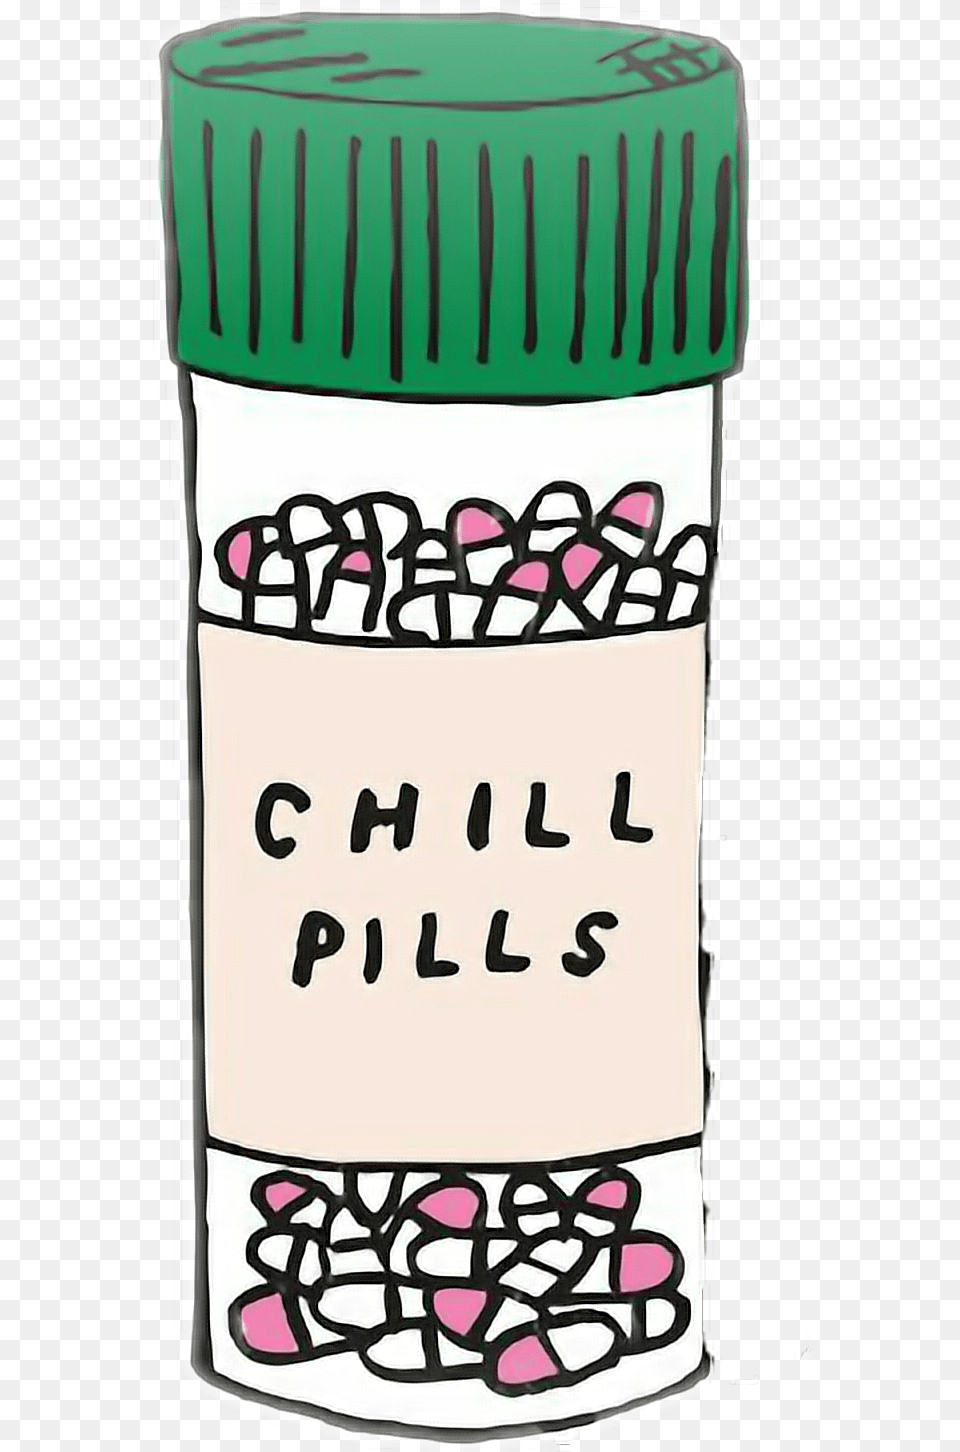 Chillpills Tumblr Cute Pastillas Iphone Xr Cases Food, Jar, Text, Alcohol, Beer Free Transparent Png